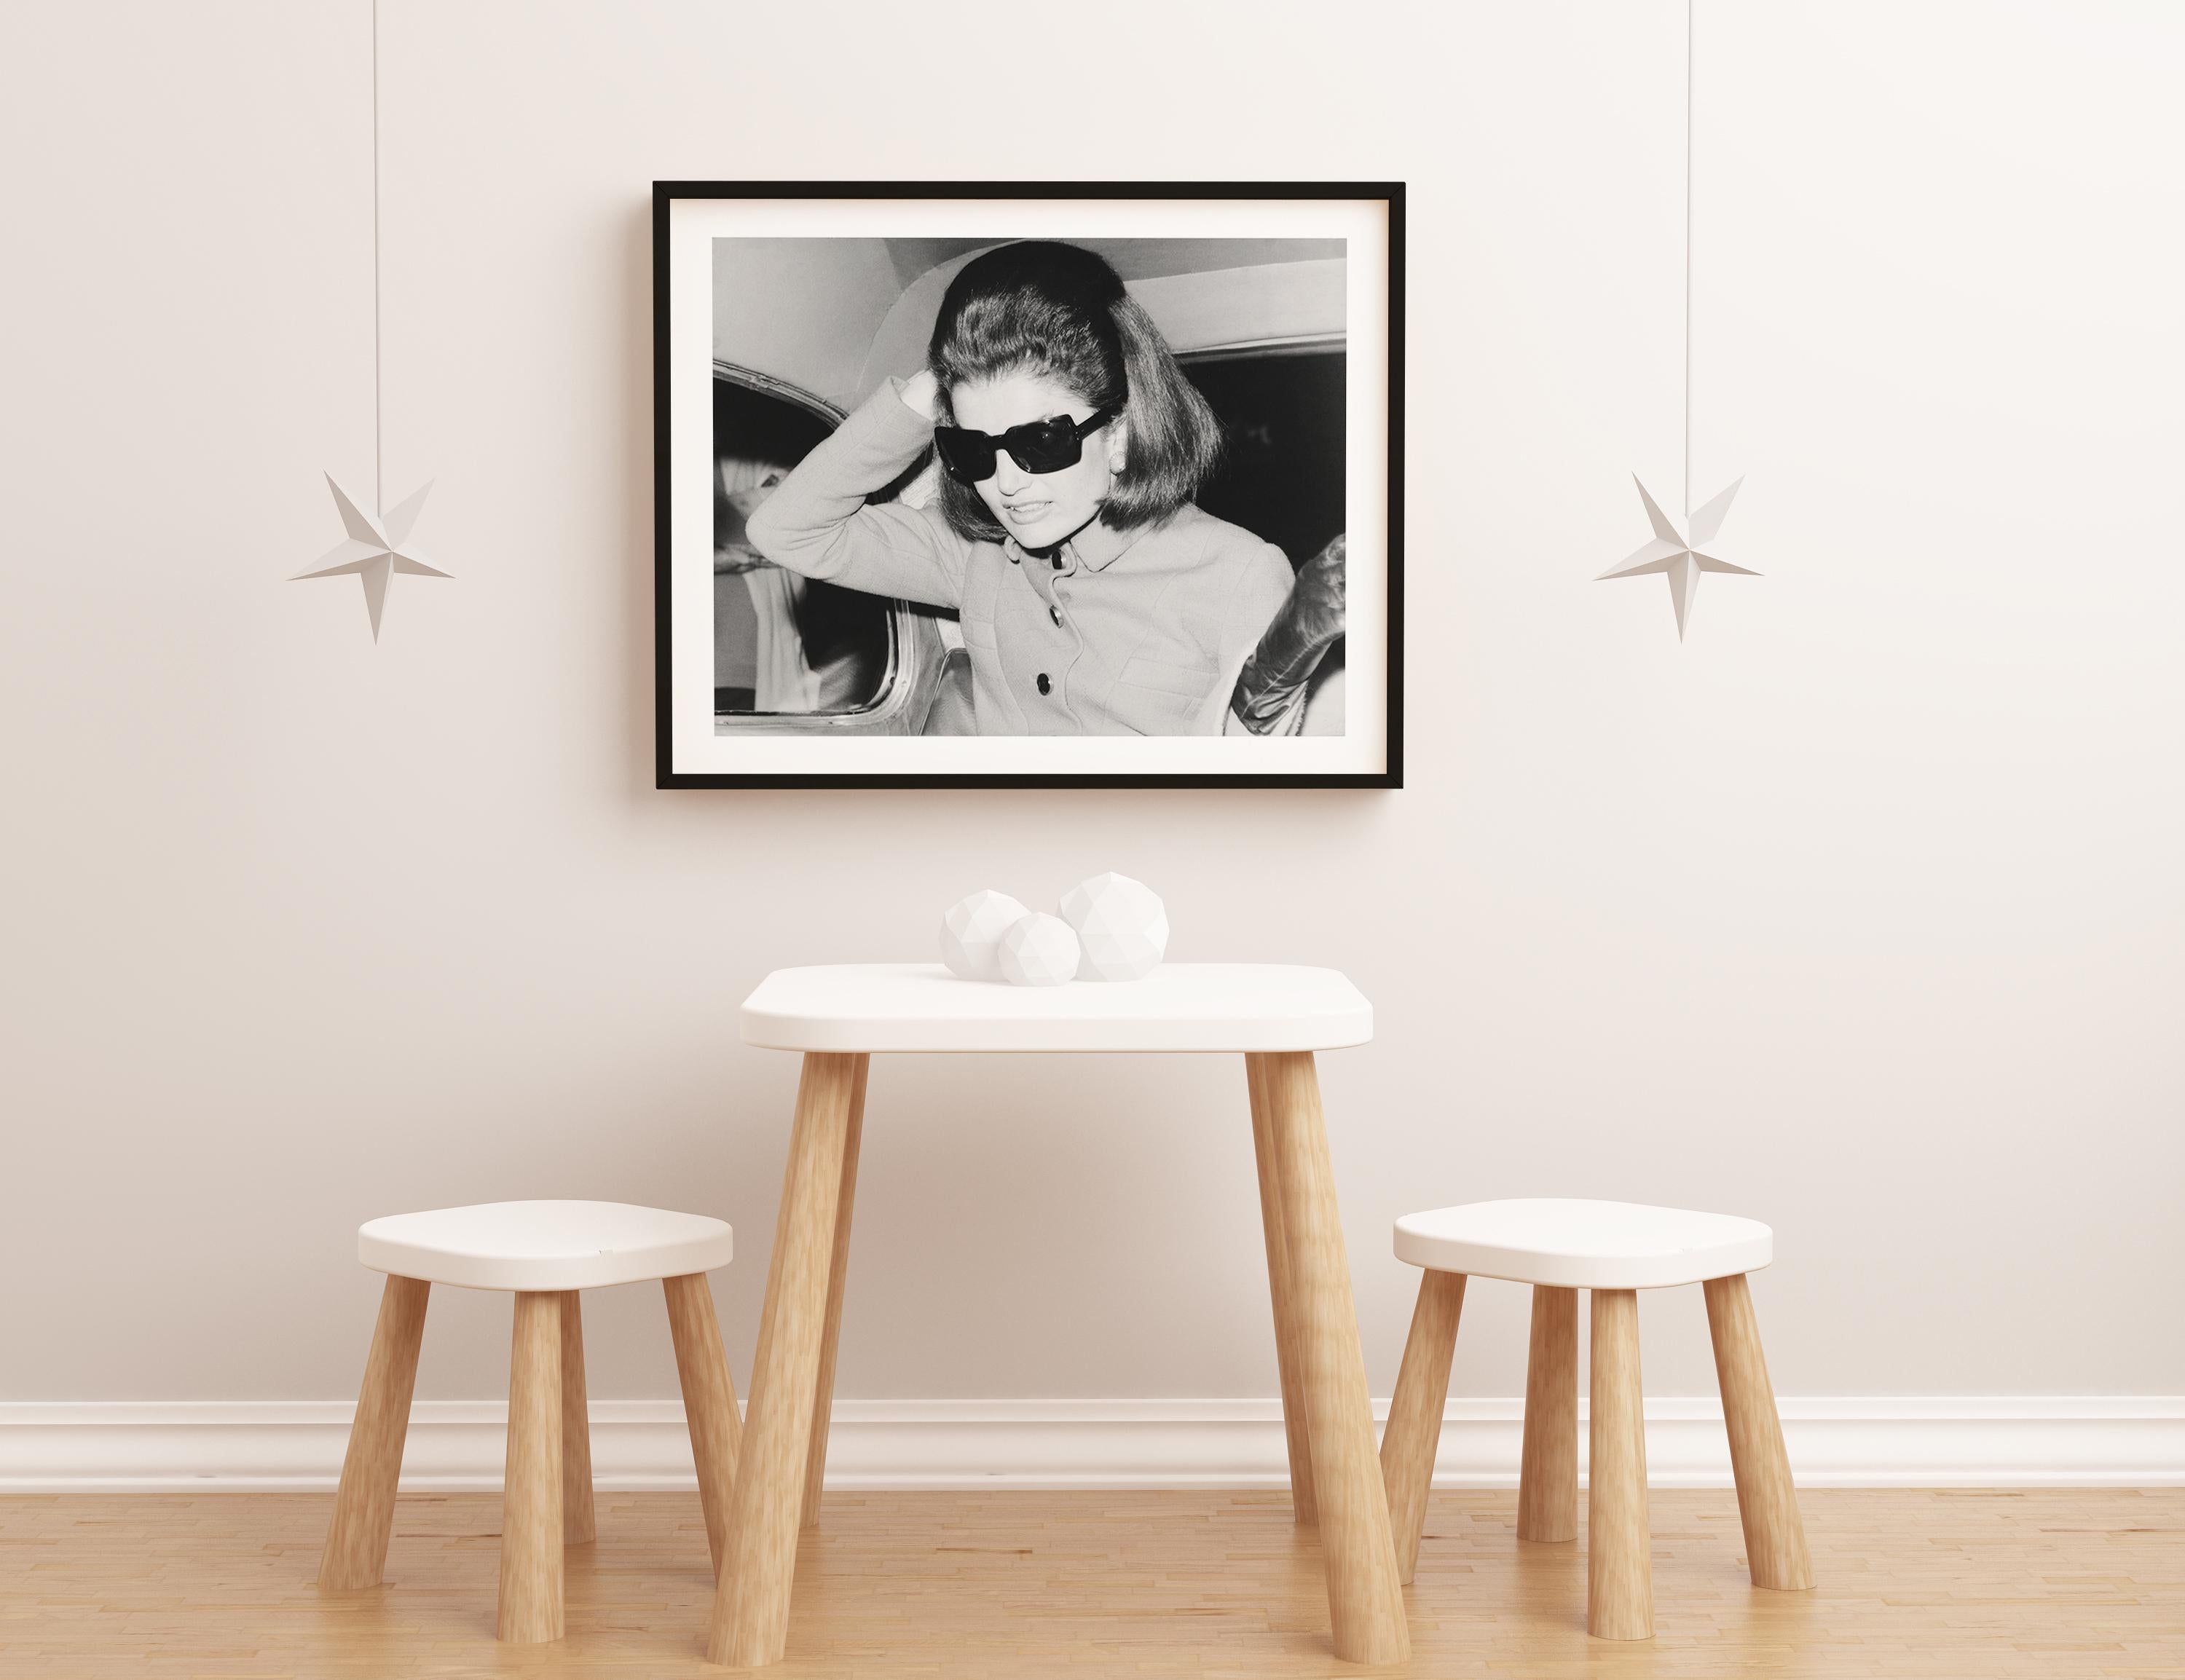 Jackie Kennedy: Sunglasses at Night Globe Photos Fine Art Print - Gray Portrait Photograph by Unknown